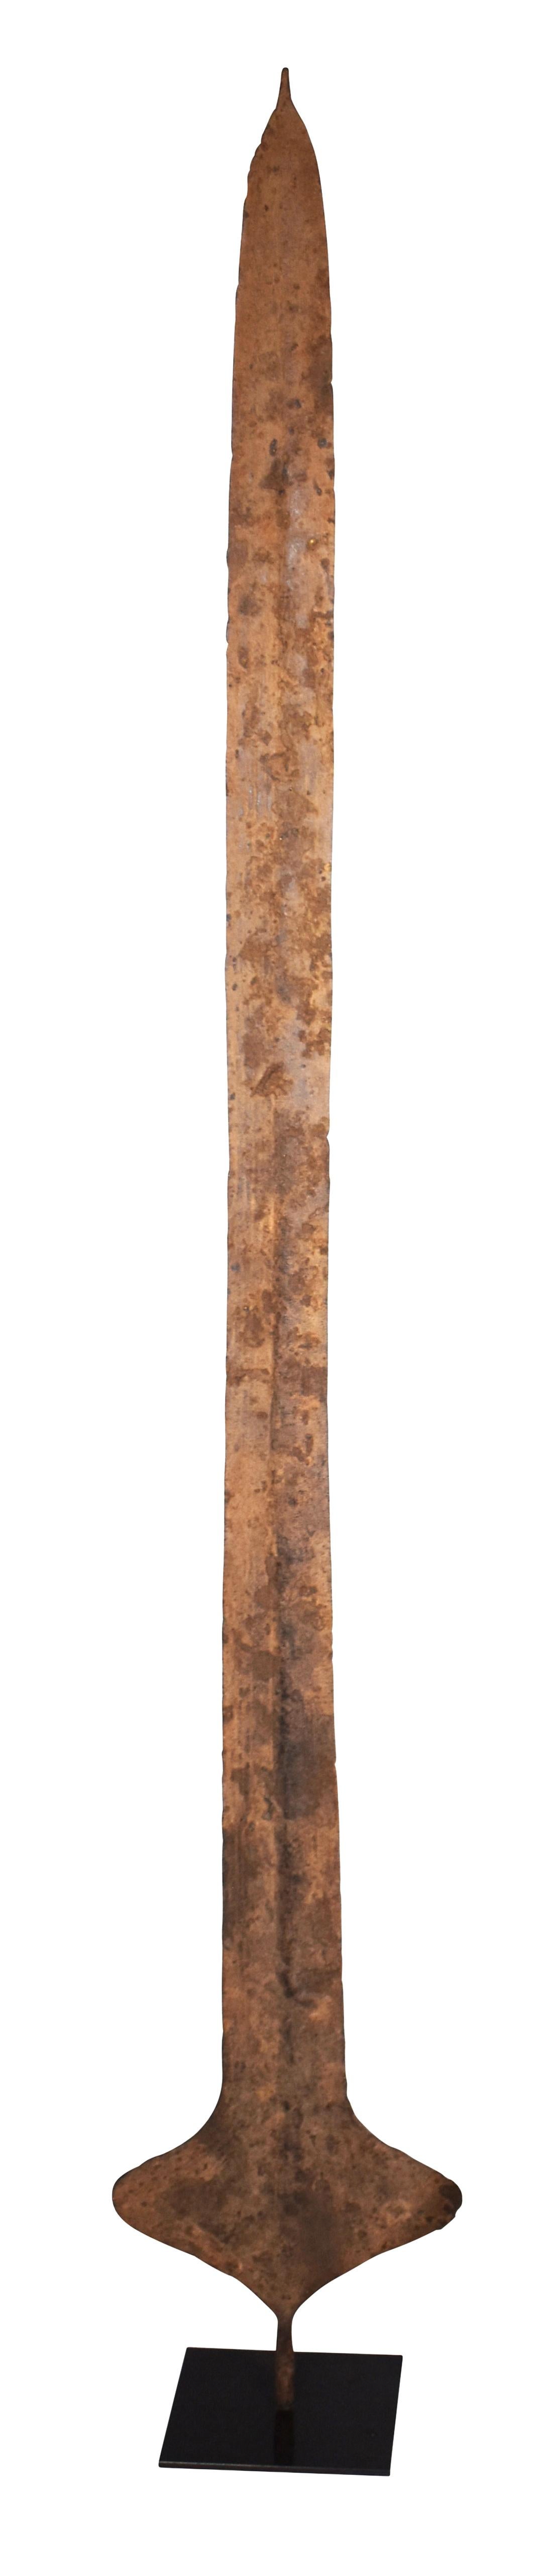 African currency Sword used in Congo for important transactions such as dowry or land purchase. Patina and sculptural shape give the feel of contemporary art mixed with 19th century history. Displayed on metal stand.